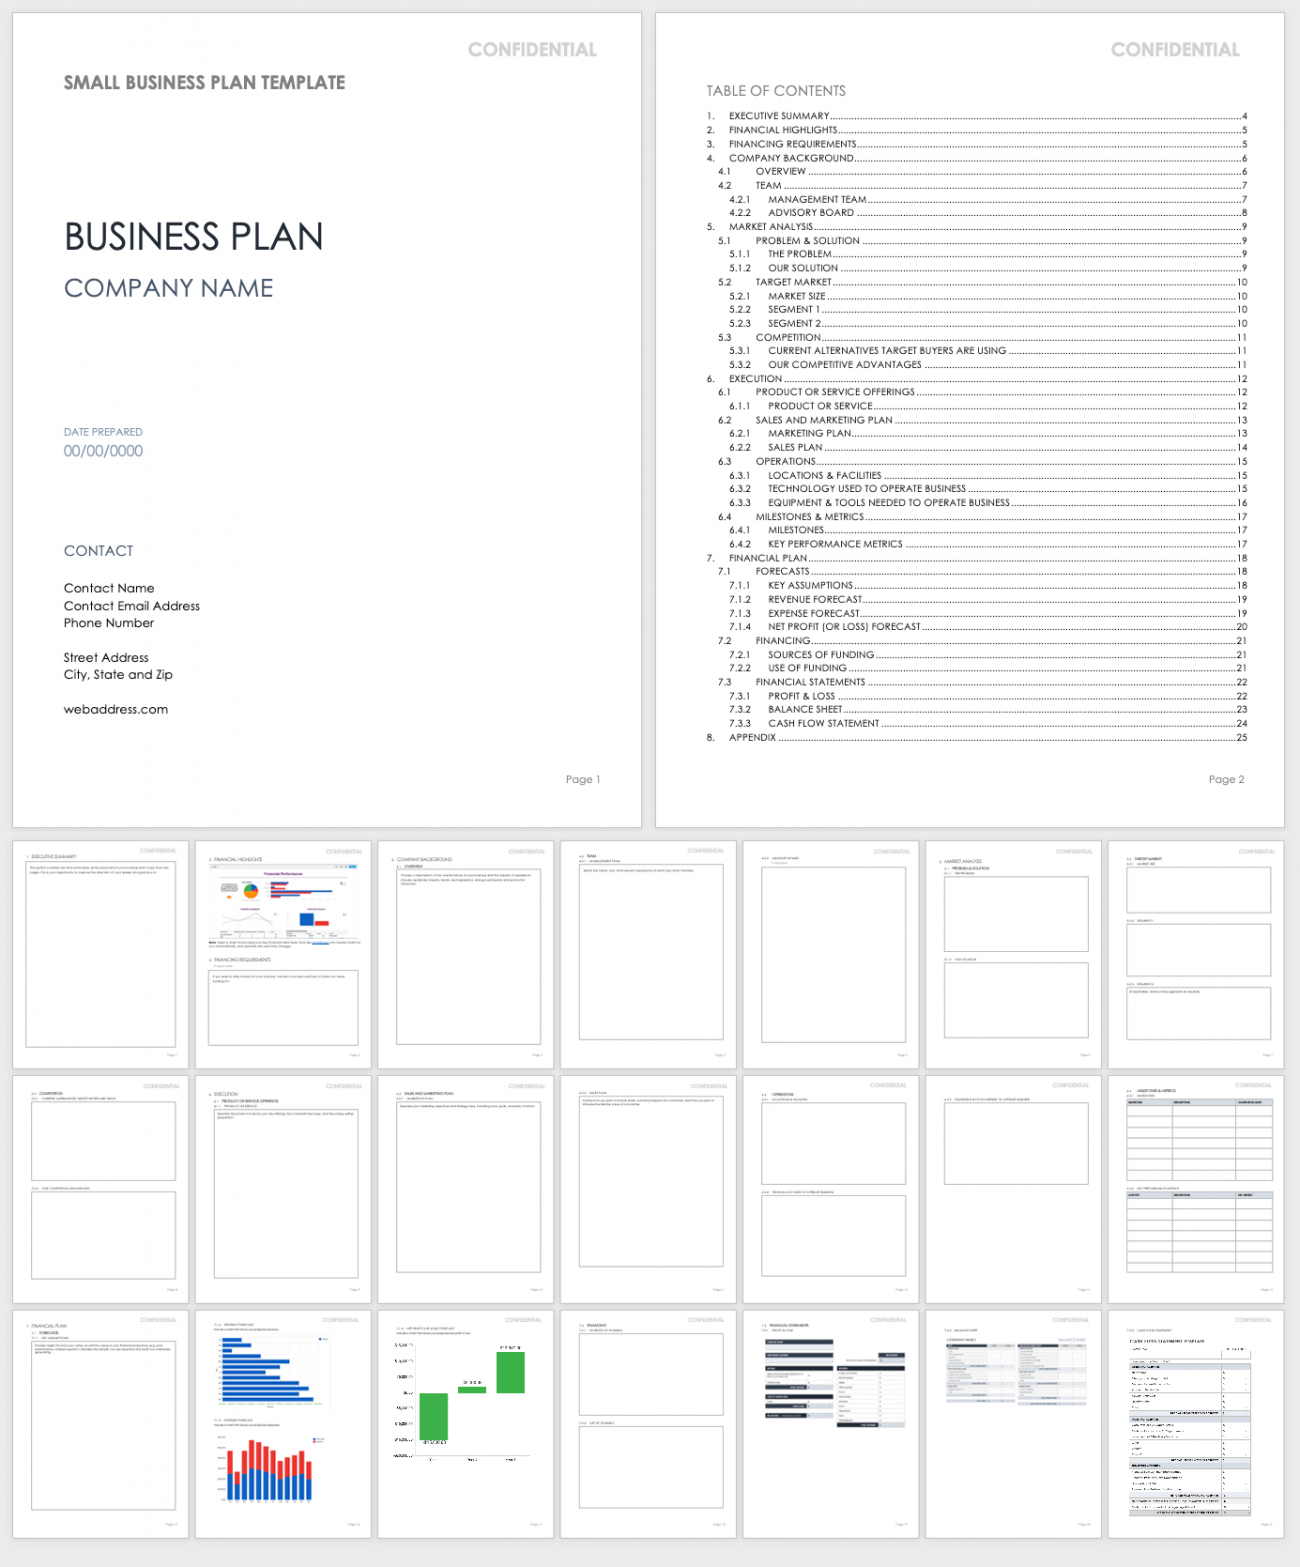 create a simple business plan by completing the template